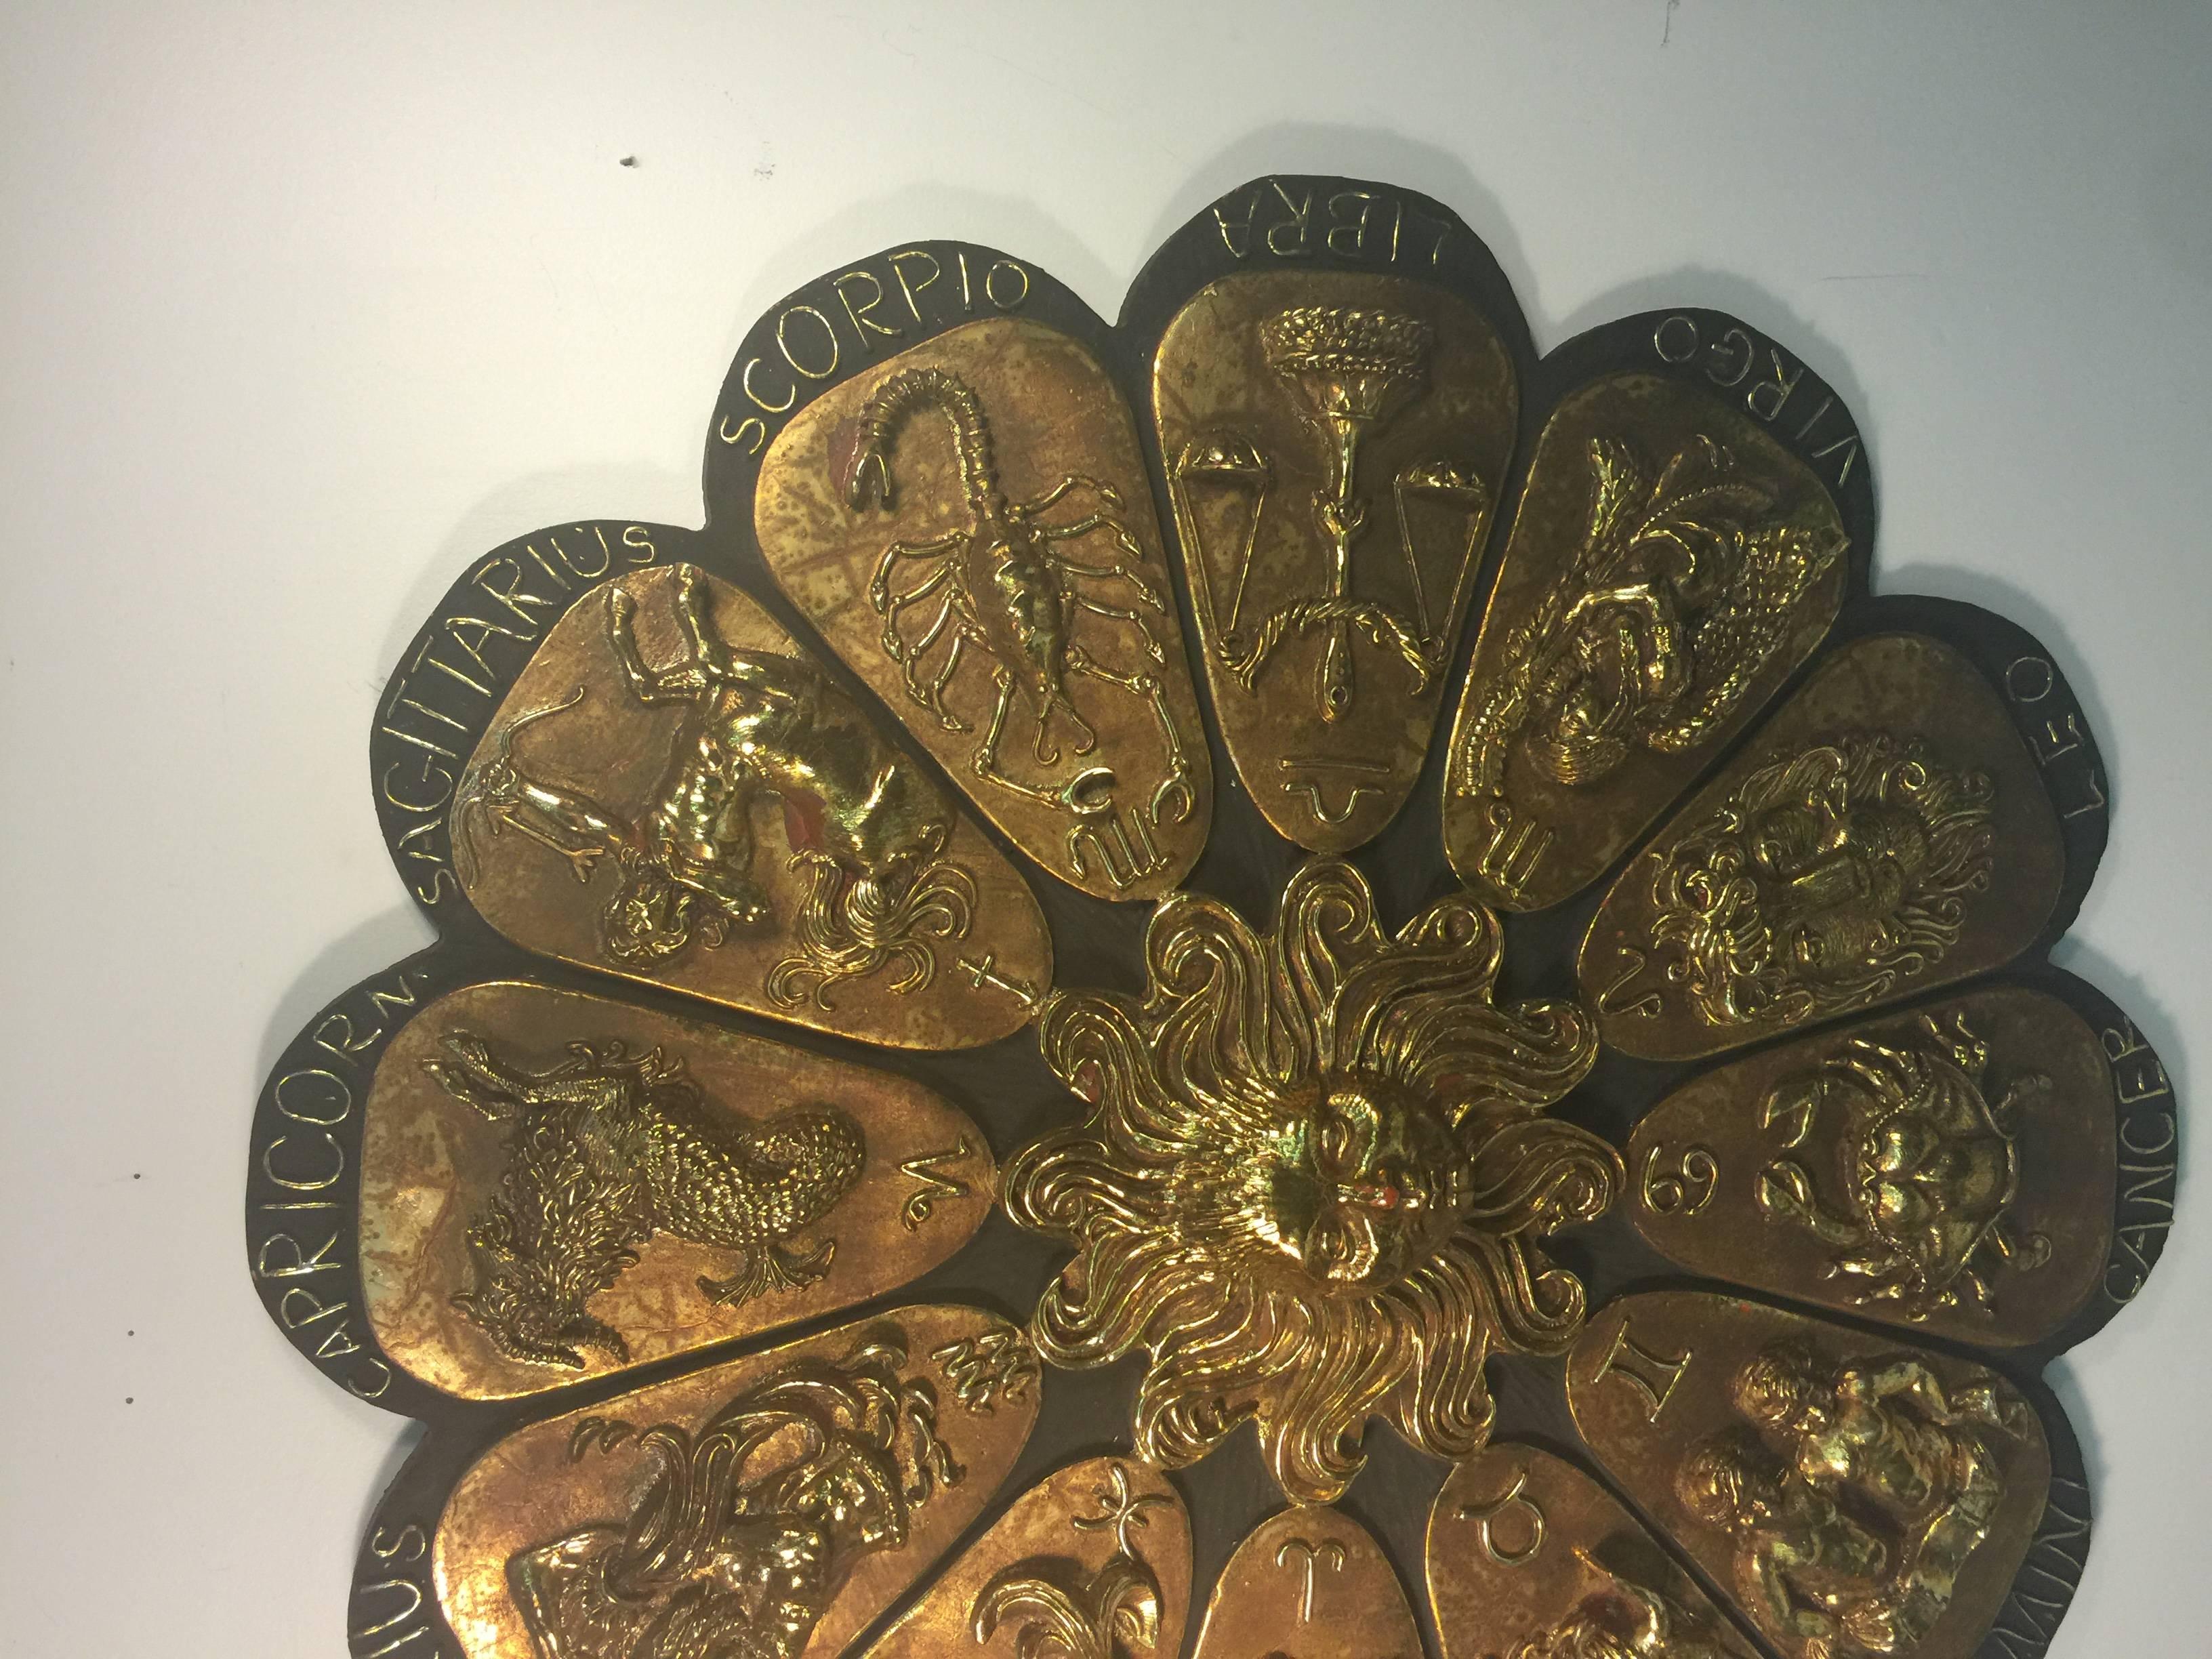 A fabulous bronzed and cast resin wall sculpture or plaque with the 12 signs of the zodiac, circa 1970.